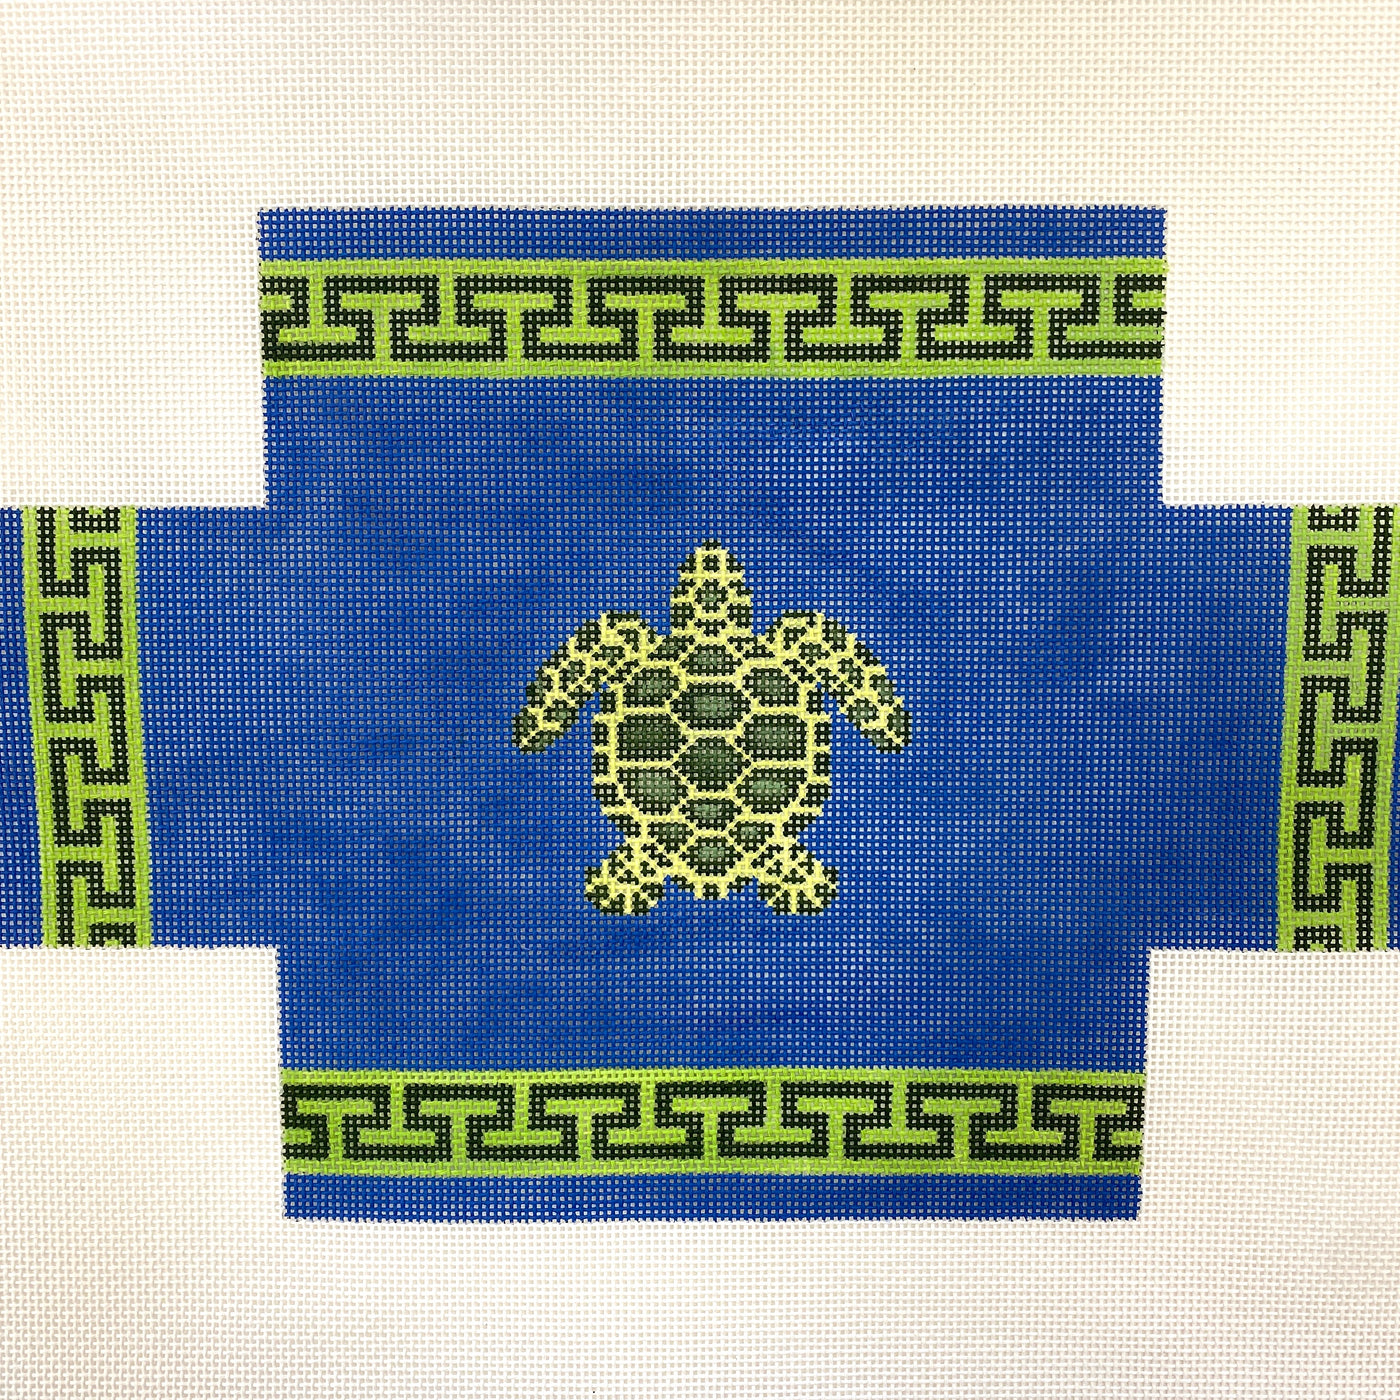 Snappy Turtle on Blue Brick Cover Needlepoint Canvas